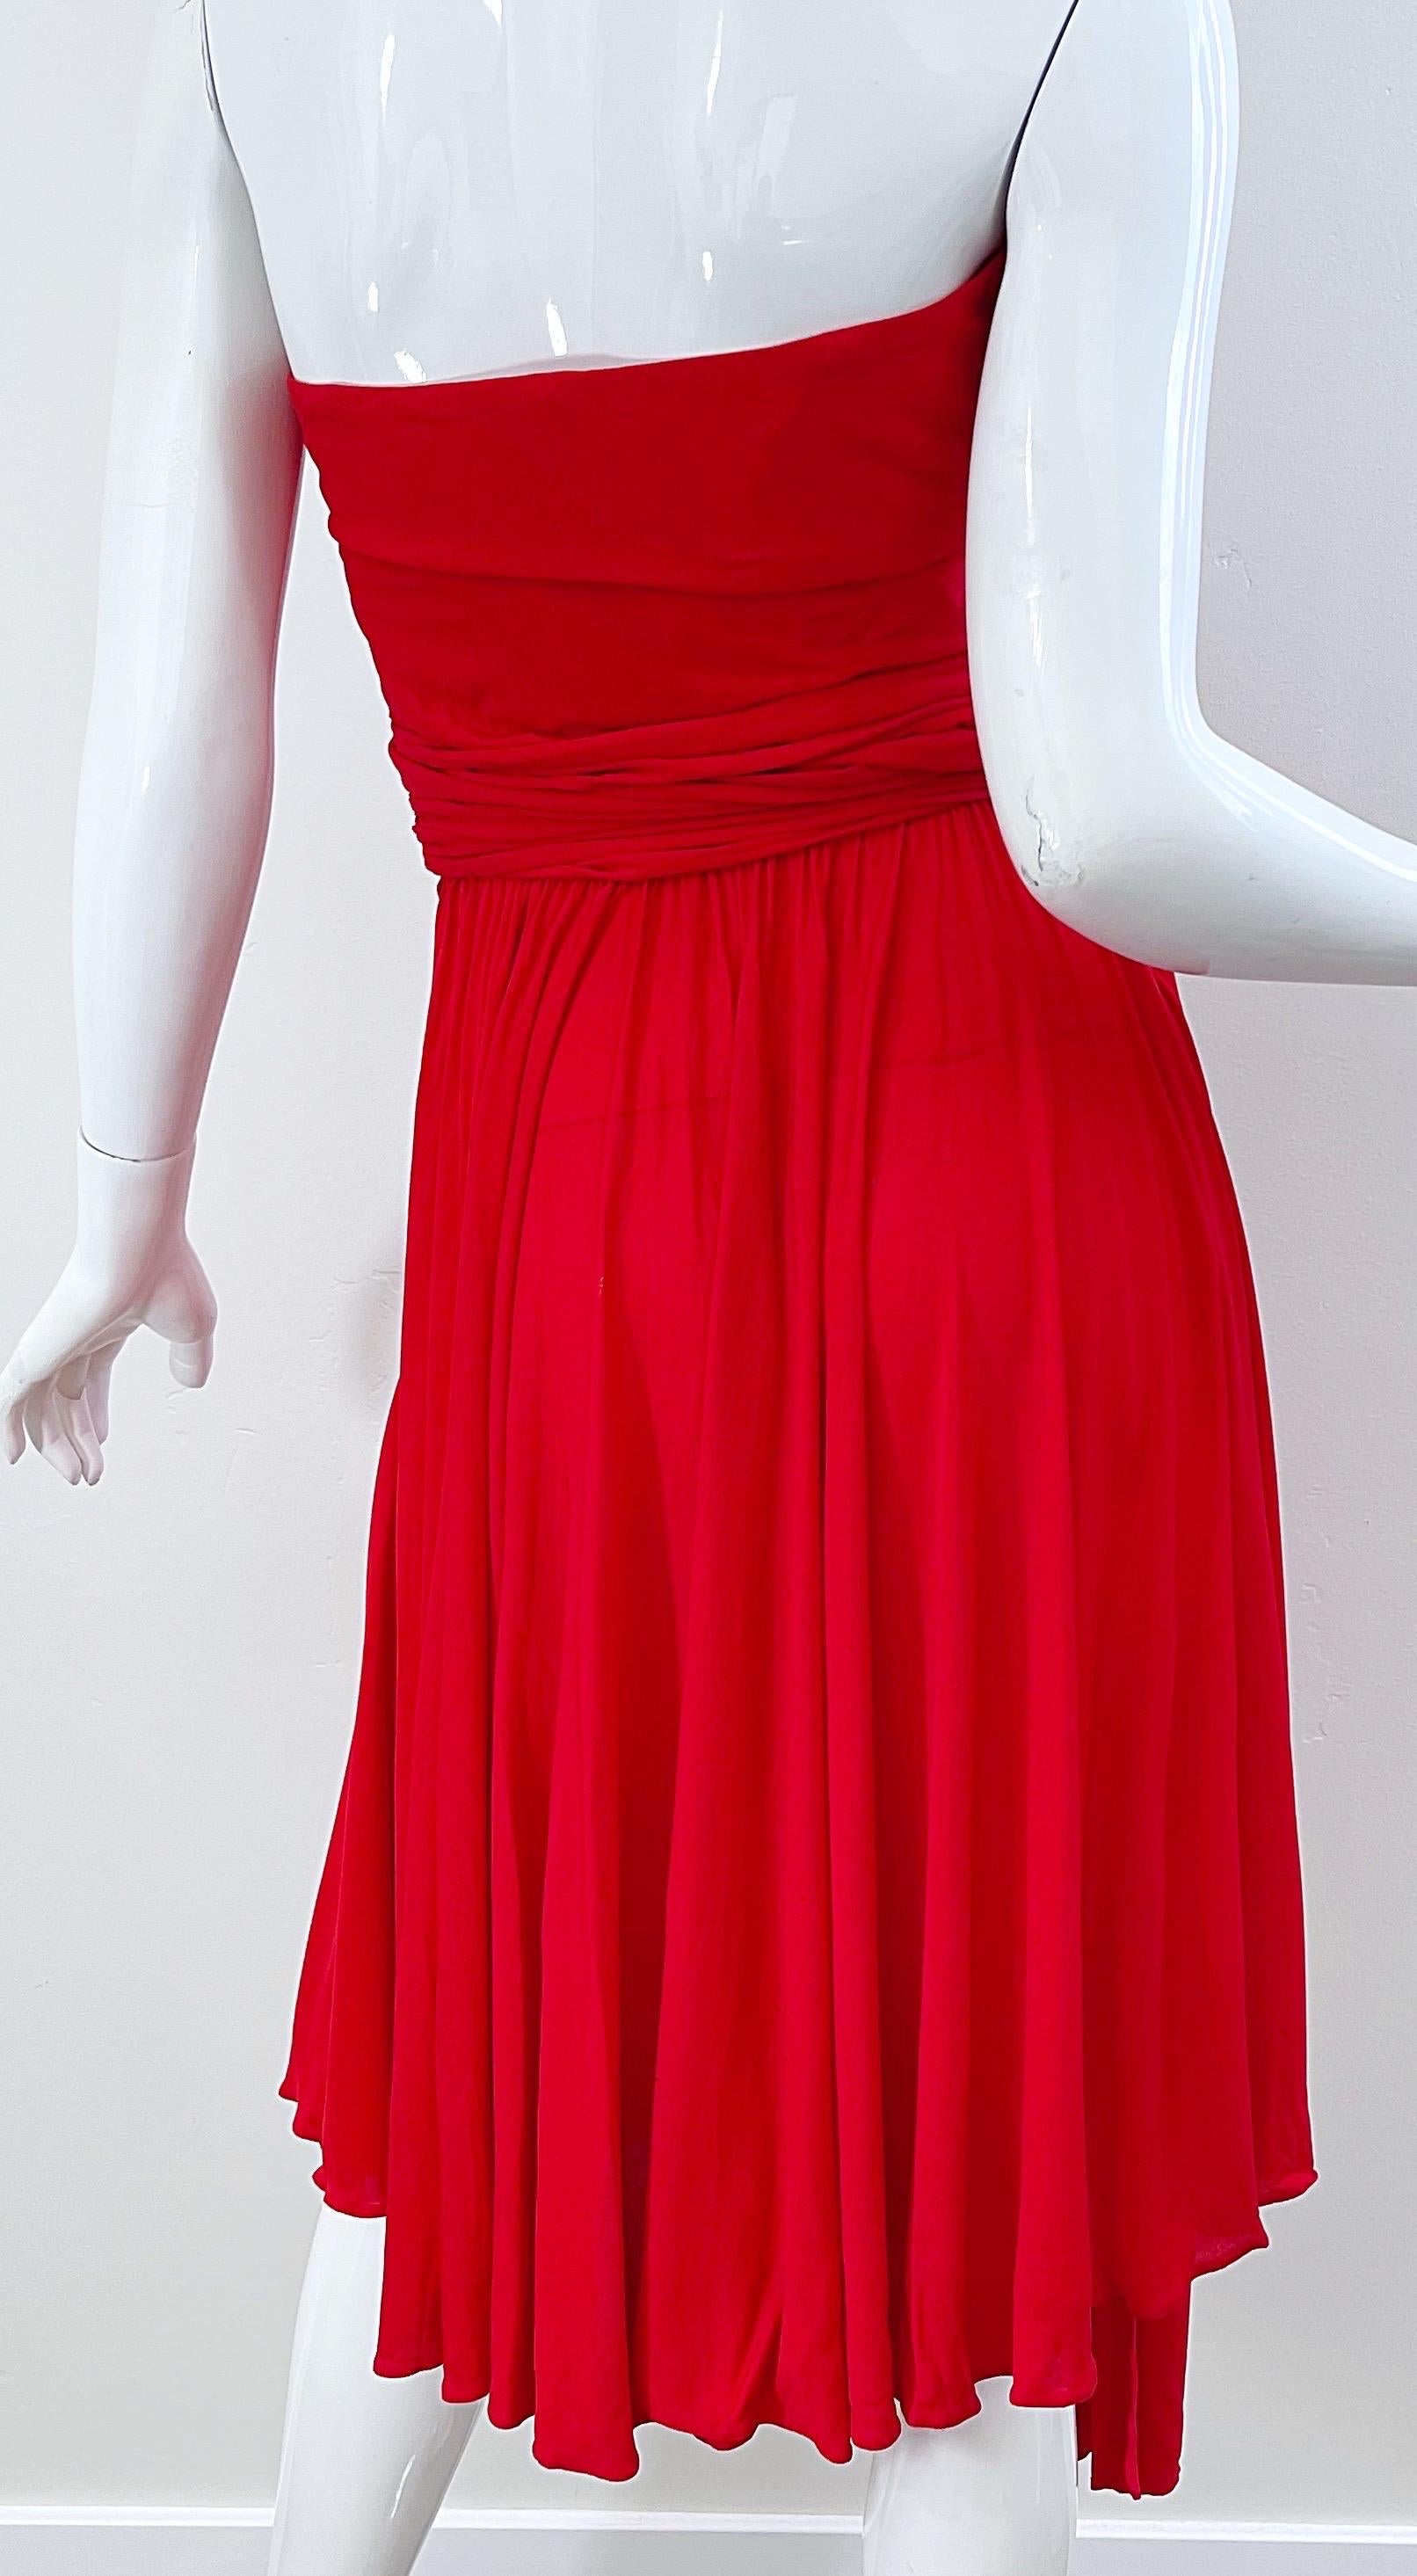 Runway Yves Saint Laurent S/S 1989 Lipstick Red Rayon Jersey Strapless 80s Dress For Sale 5